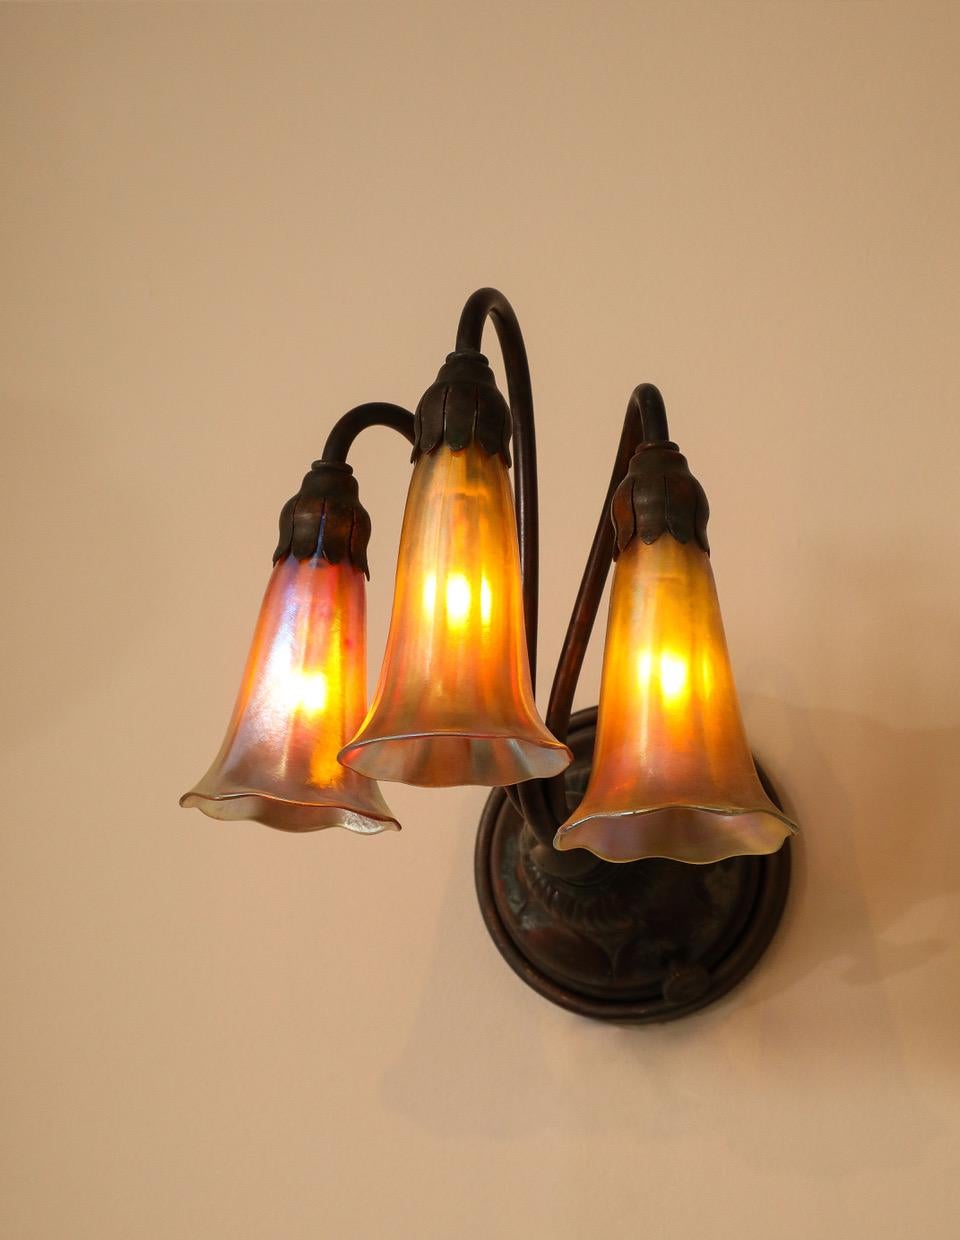 Each bronze wall fixture with three arms each supporting an art glass Lily, signed L.C.T. 

Electric is UL Certified.

Provenance: Originally purchased from Macklowe Gallery by present owner.